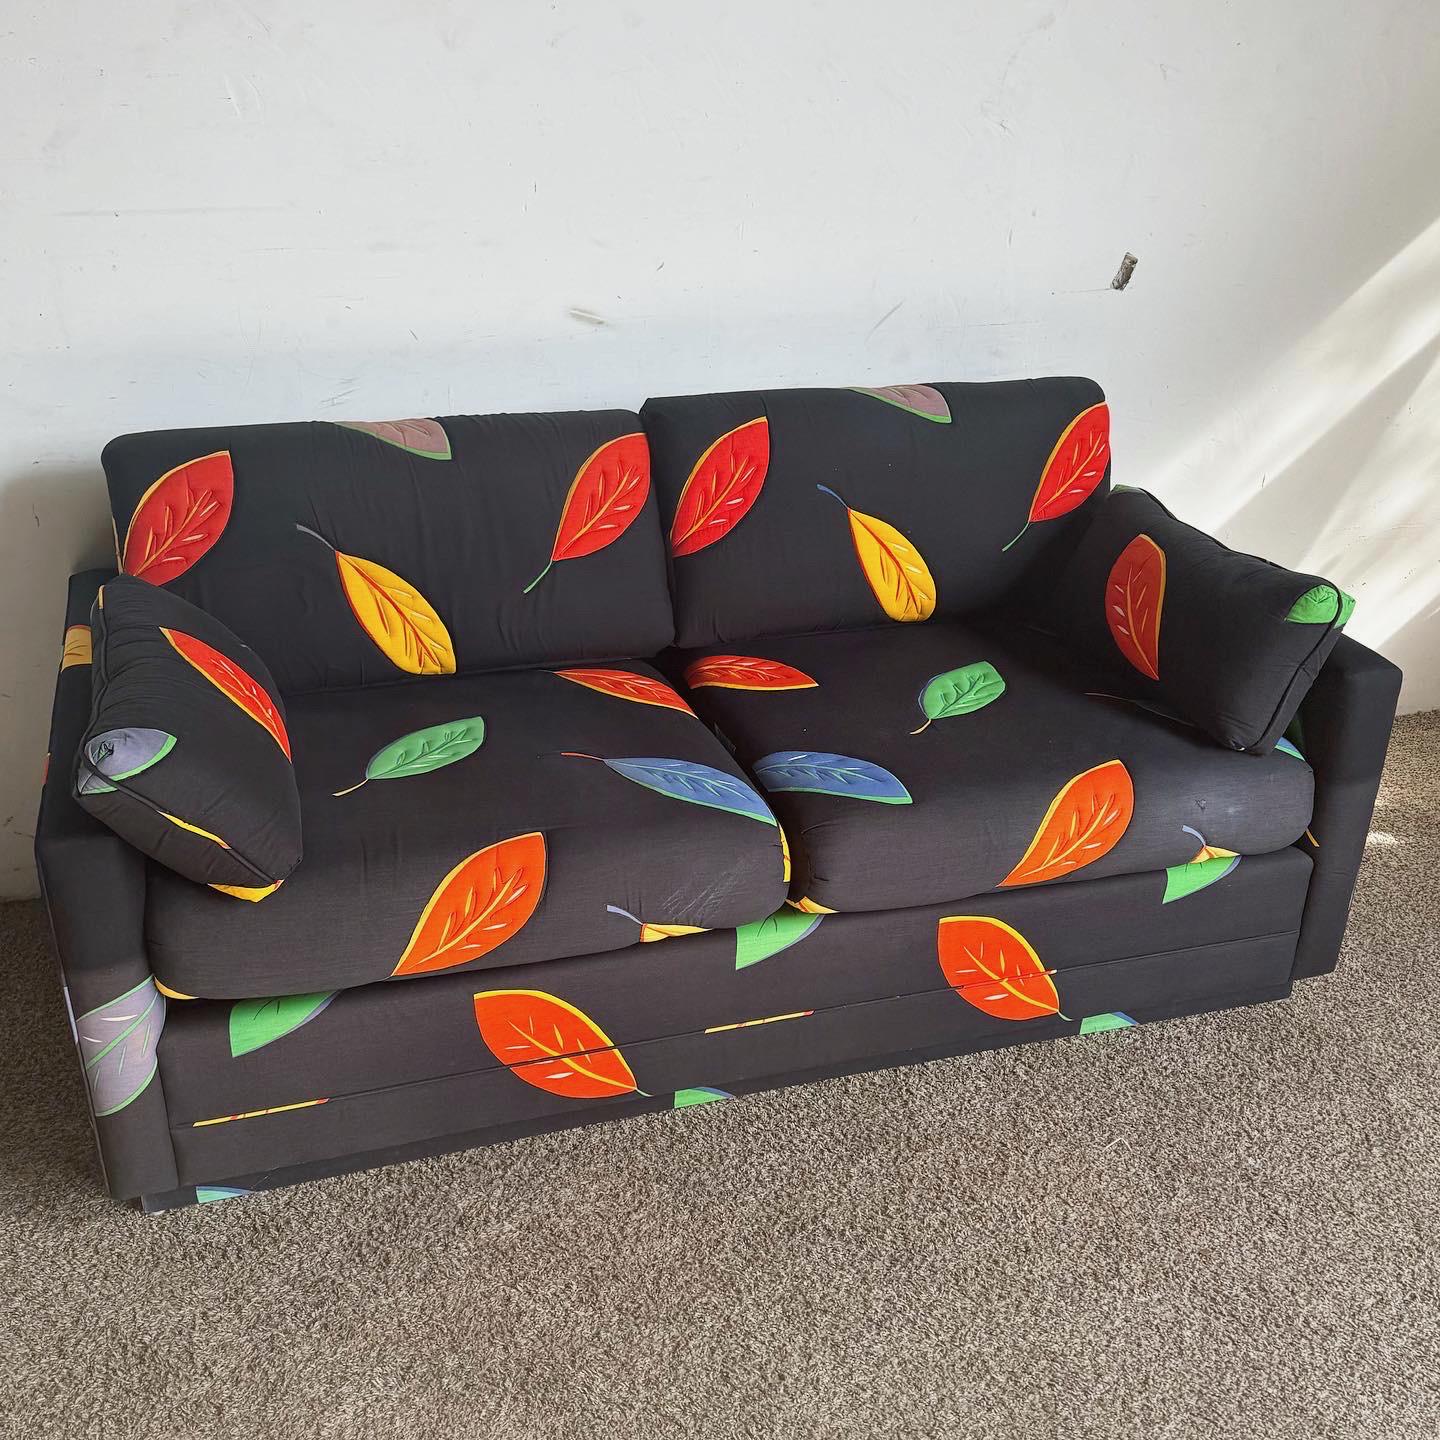 Elevate your decor with the Postmodern Multi Color Leaf/Black Fabric Sofa/Love Seat, featuring a vibrant leaf pattern for a contemporary living space.
Some wear and sports to the fabric as seen in the photos.